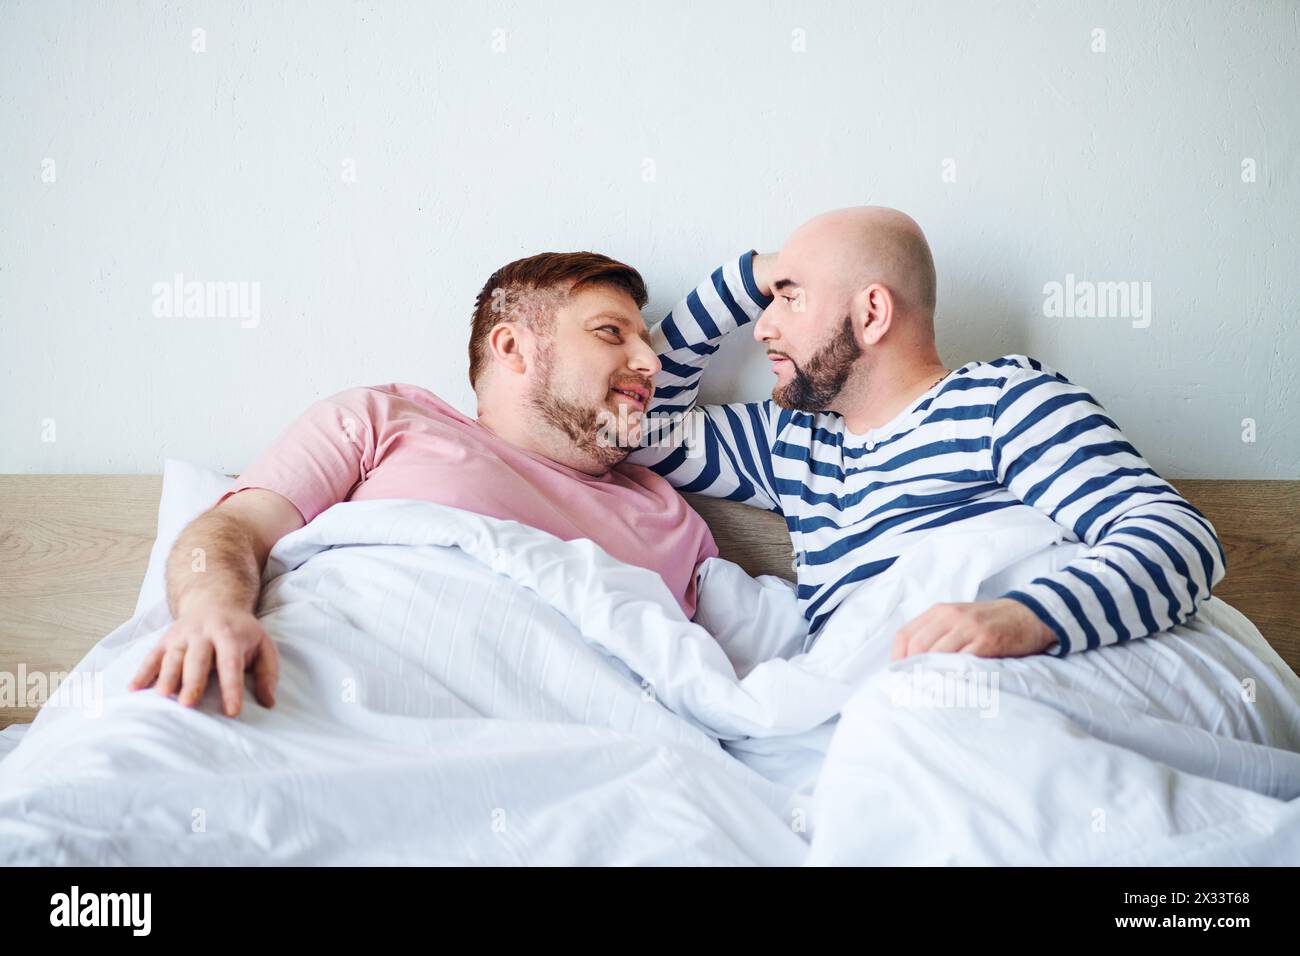 A pair of men laying side by side in bed, spending quality time together. Stock Photo